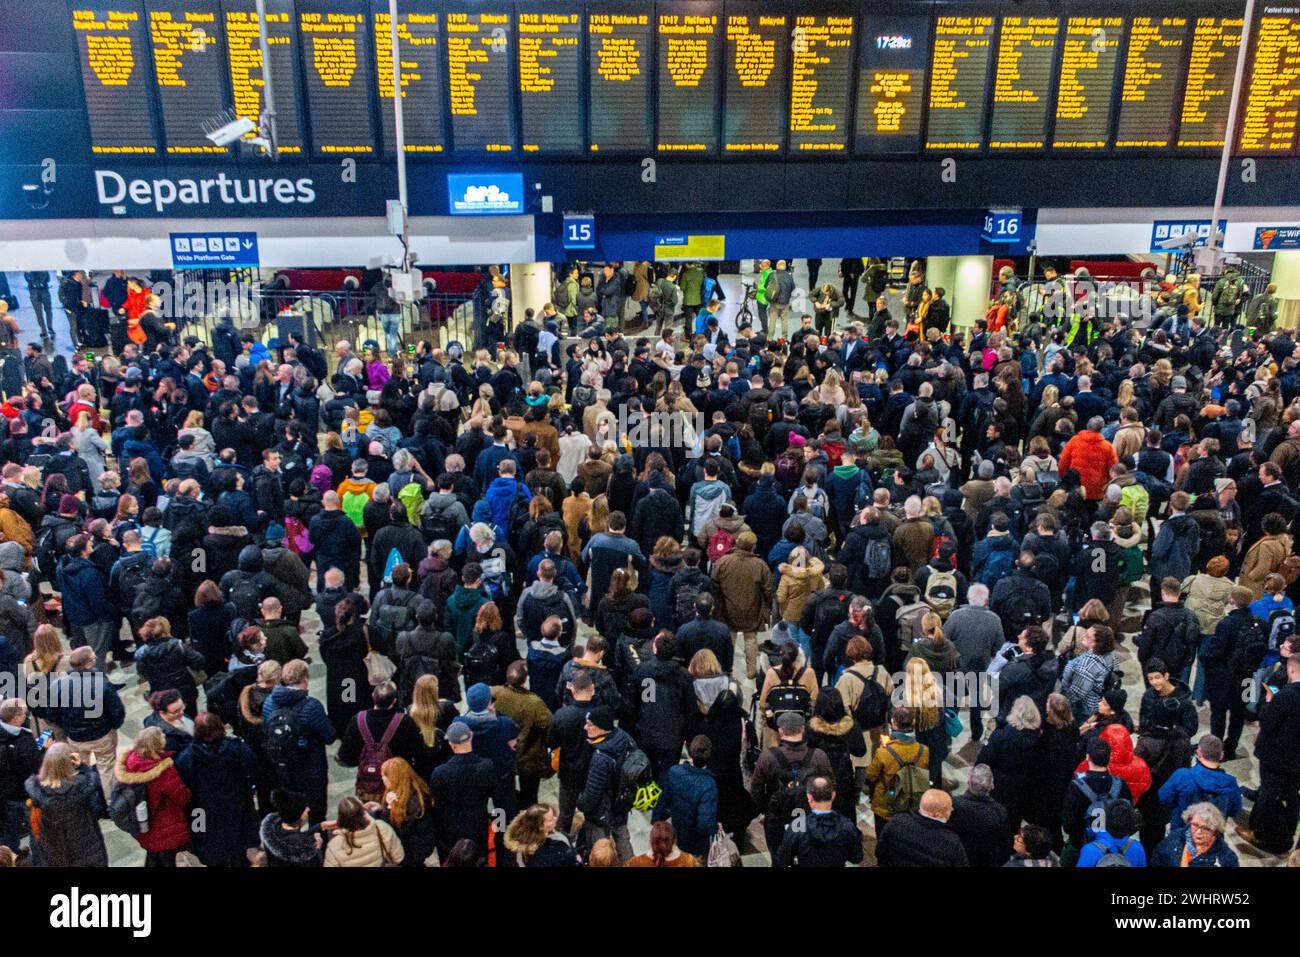 Huge crowds at Waterloo Station during a train strike Stock Photo